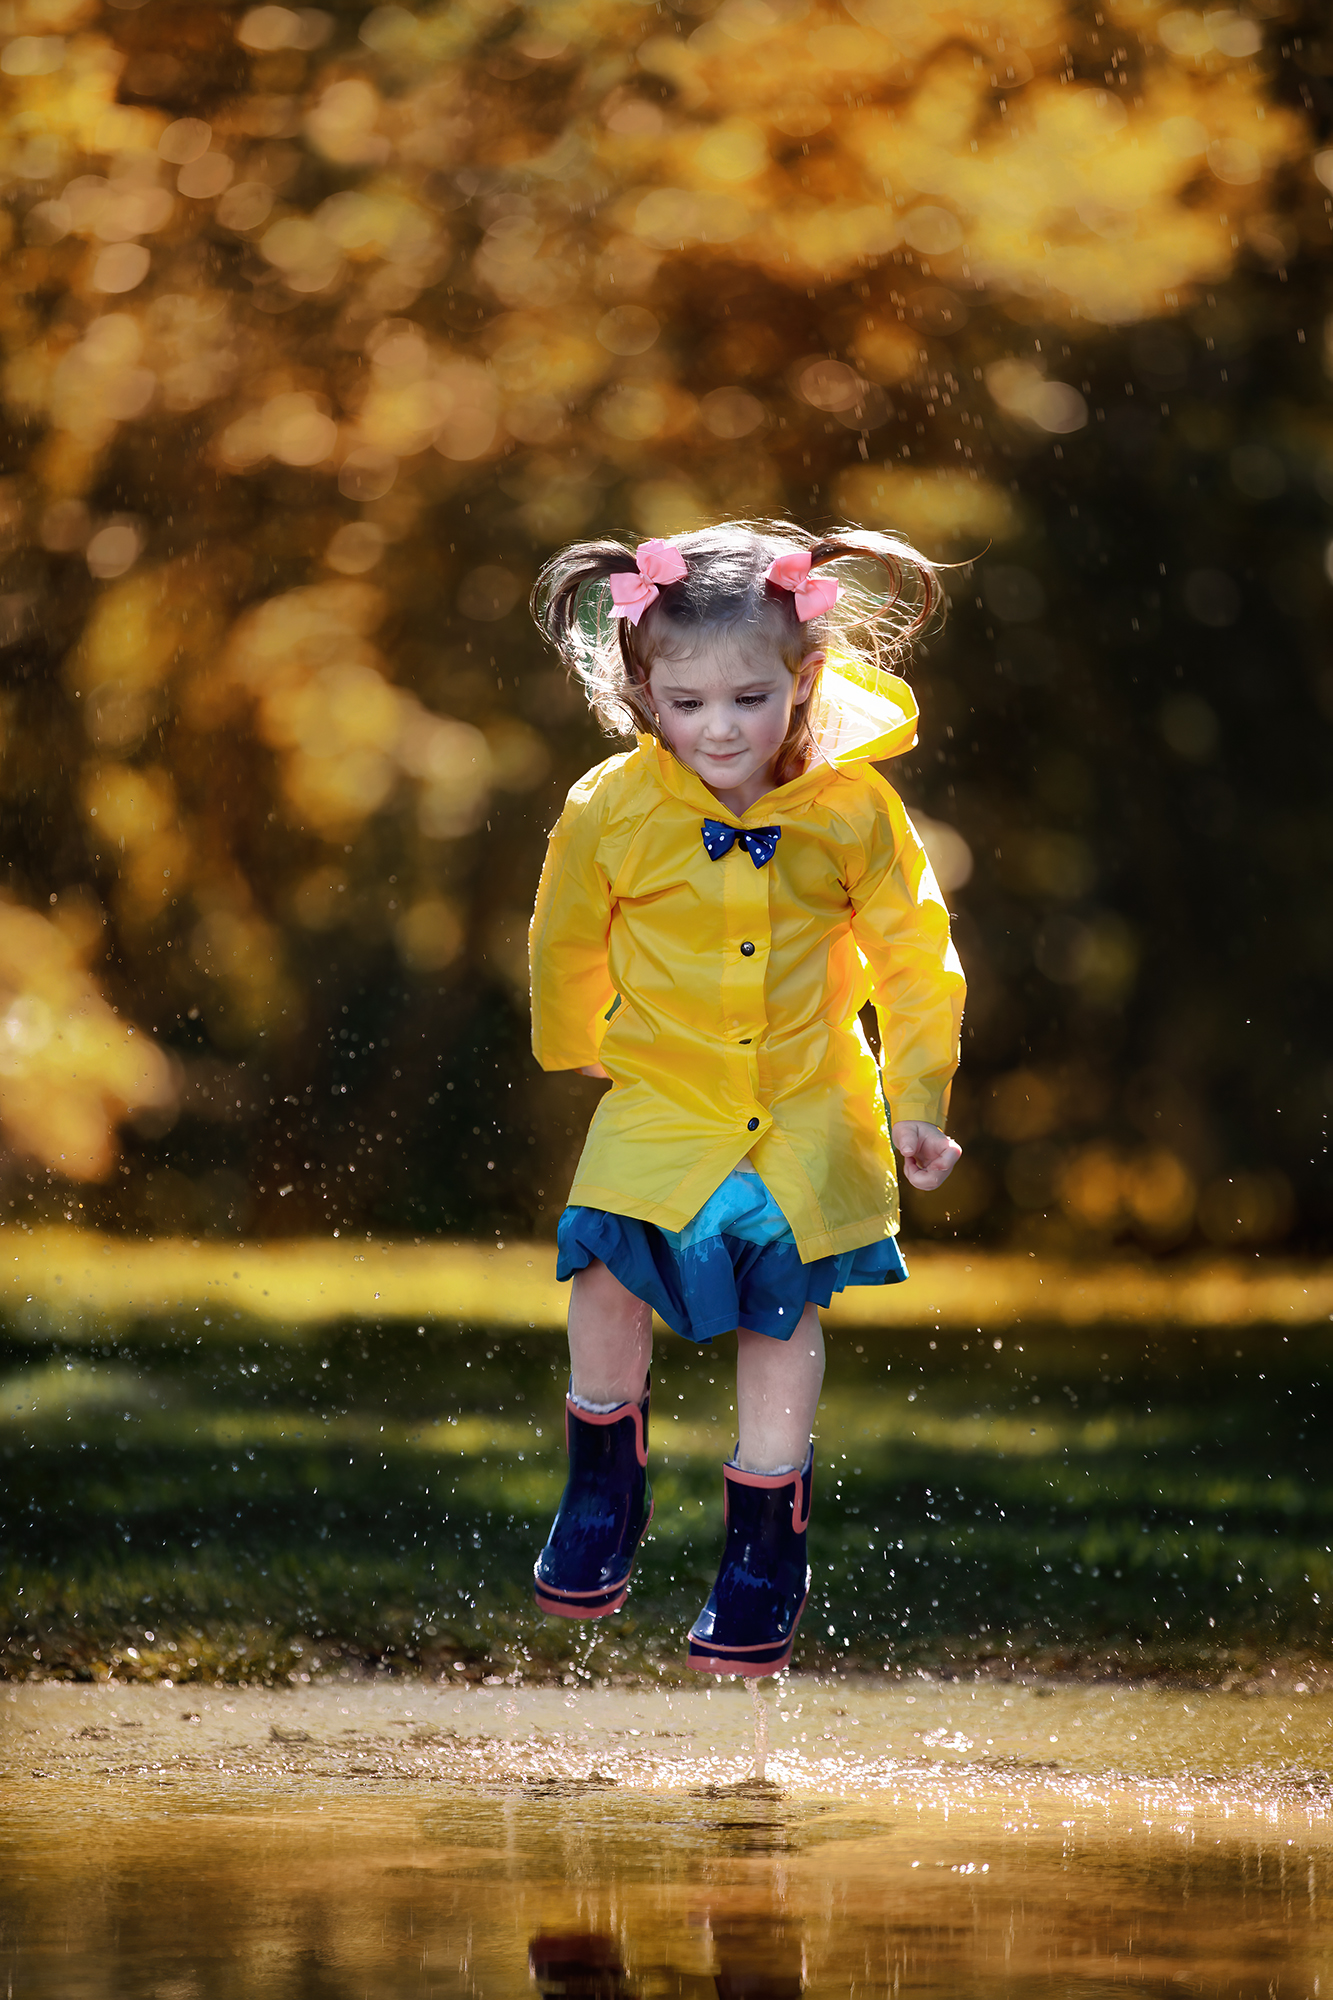 Beautiful toddler jumping on a puddle wearing rain boots and a rain coat.